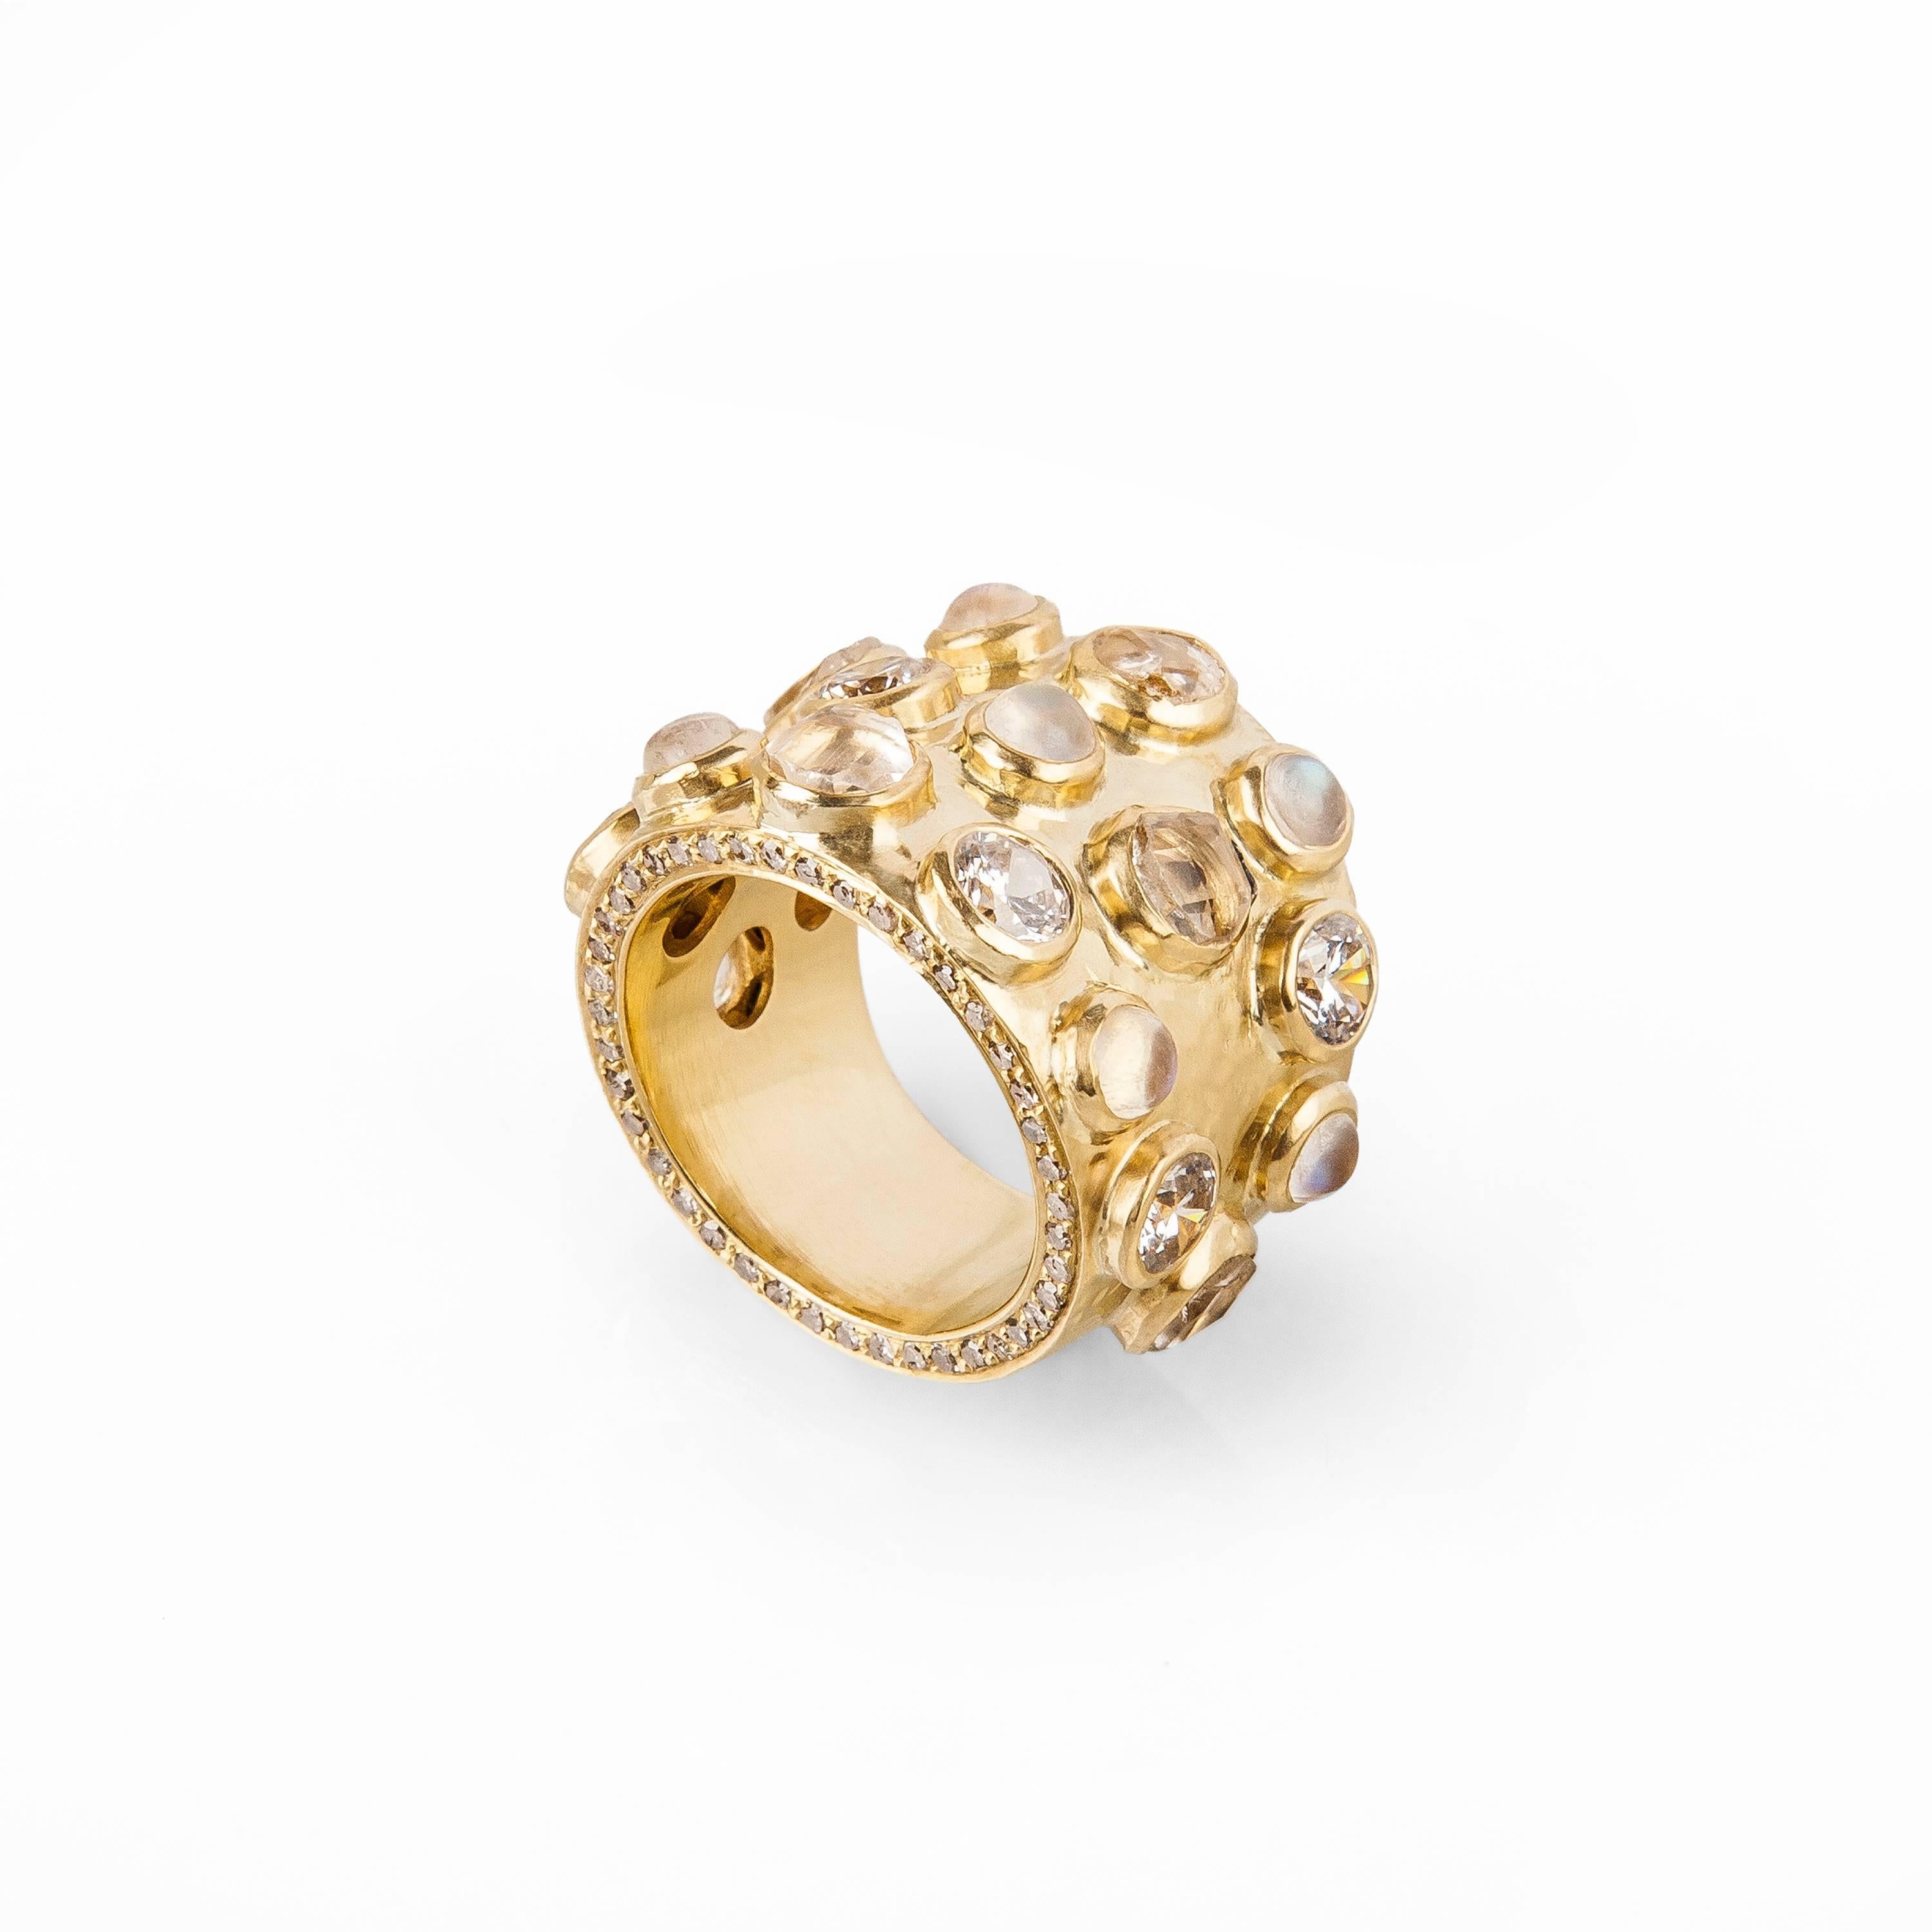 18 Karat solid hand beaten gold. Pave full cut diamonds circle the two outside edges of the ring. On the face of the ring are rose cut white sapphires and cabochon rainbow moonstones. 

Bespoke Options; The ring can be made in Rose Gold. The